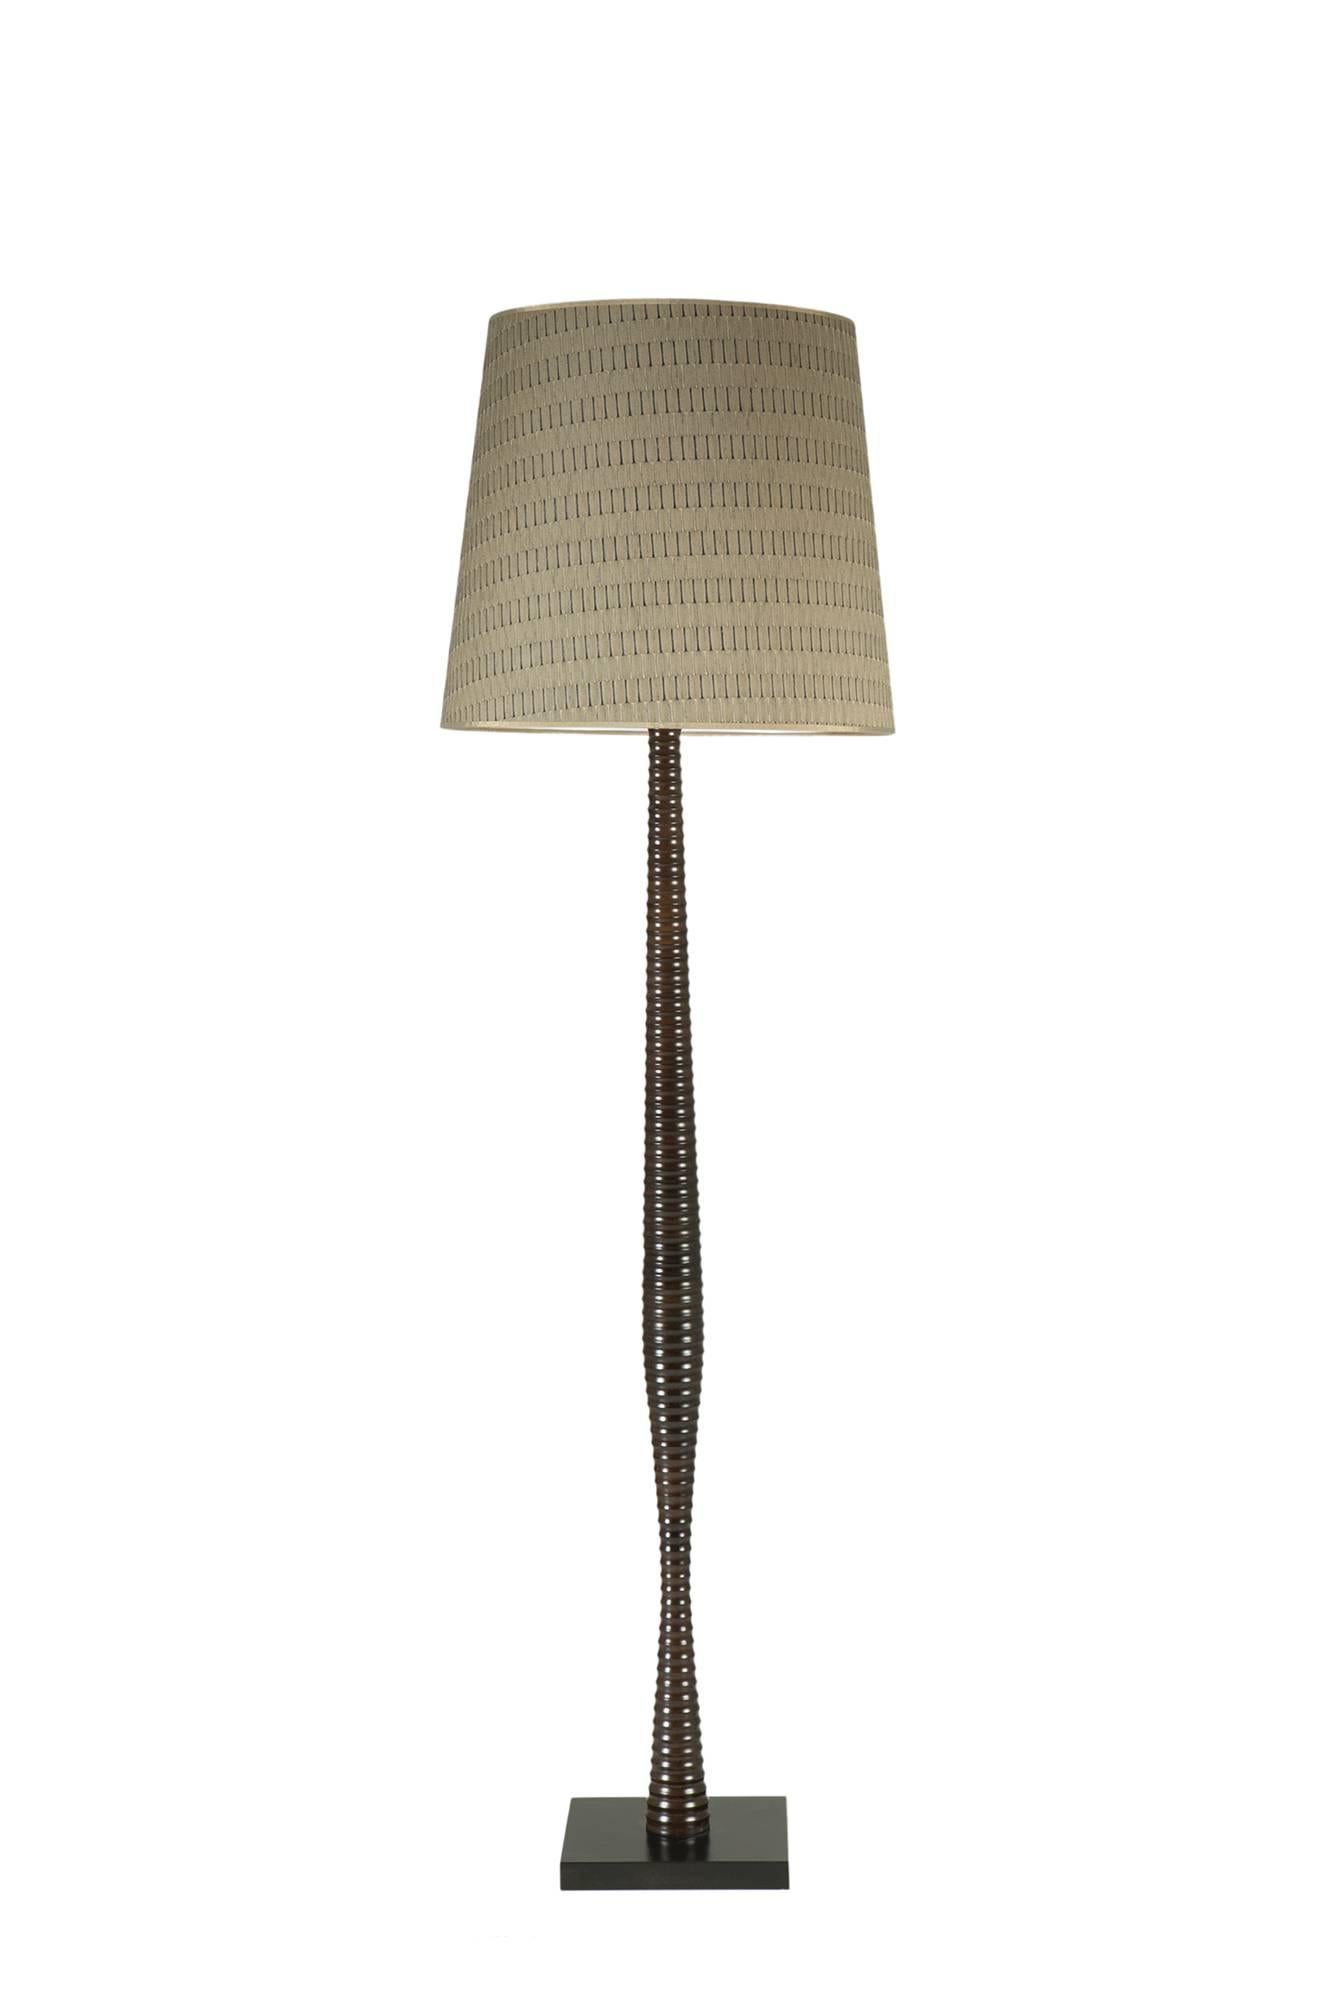 Very simple textured turned wood lamp with one E27 bulb. Choice of either darker beige 'Romul 007' shade or lighter 'beige 05' shade.

Shade: Diameter 40 cm, H 45 cm.